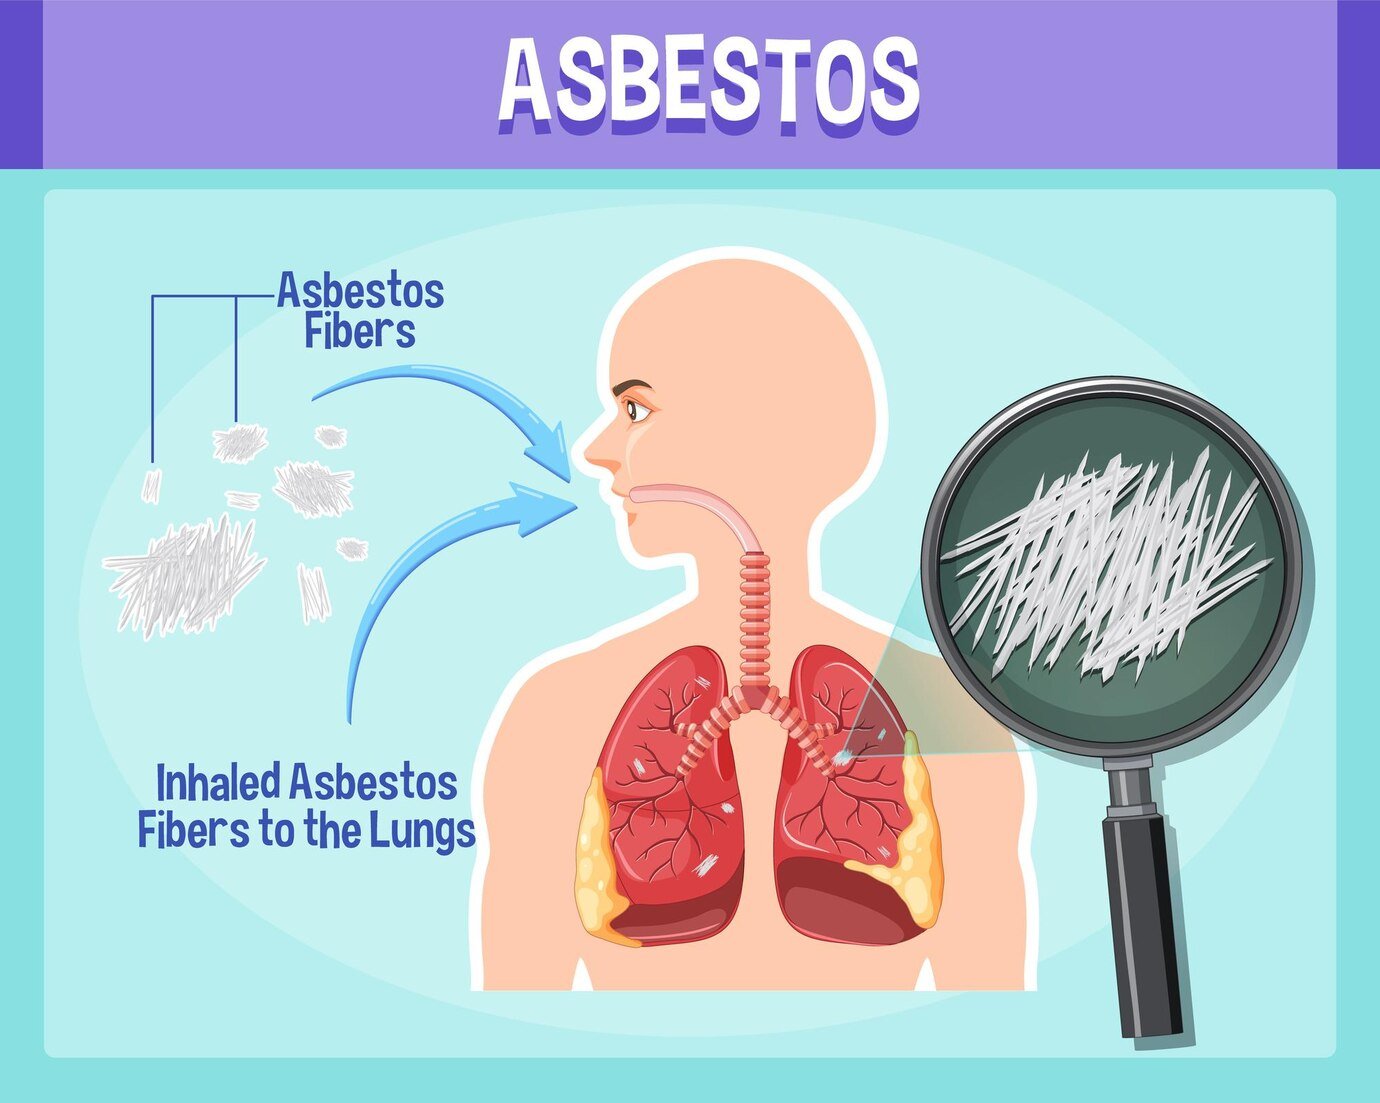  How Long Does It Take For Asbestos To Affect You?